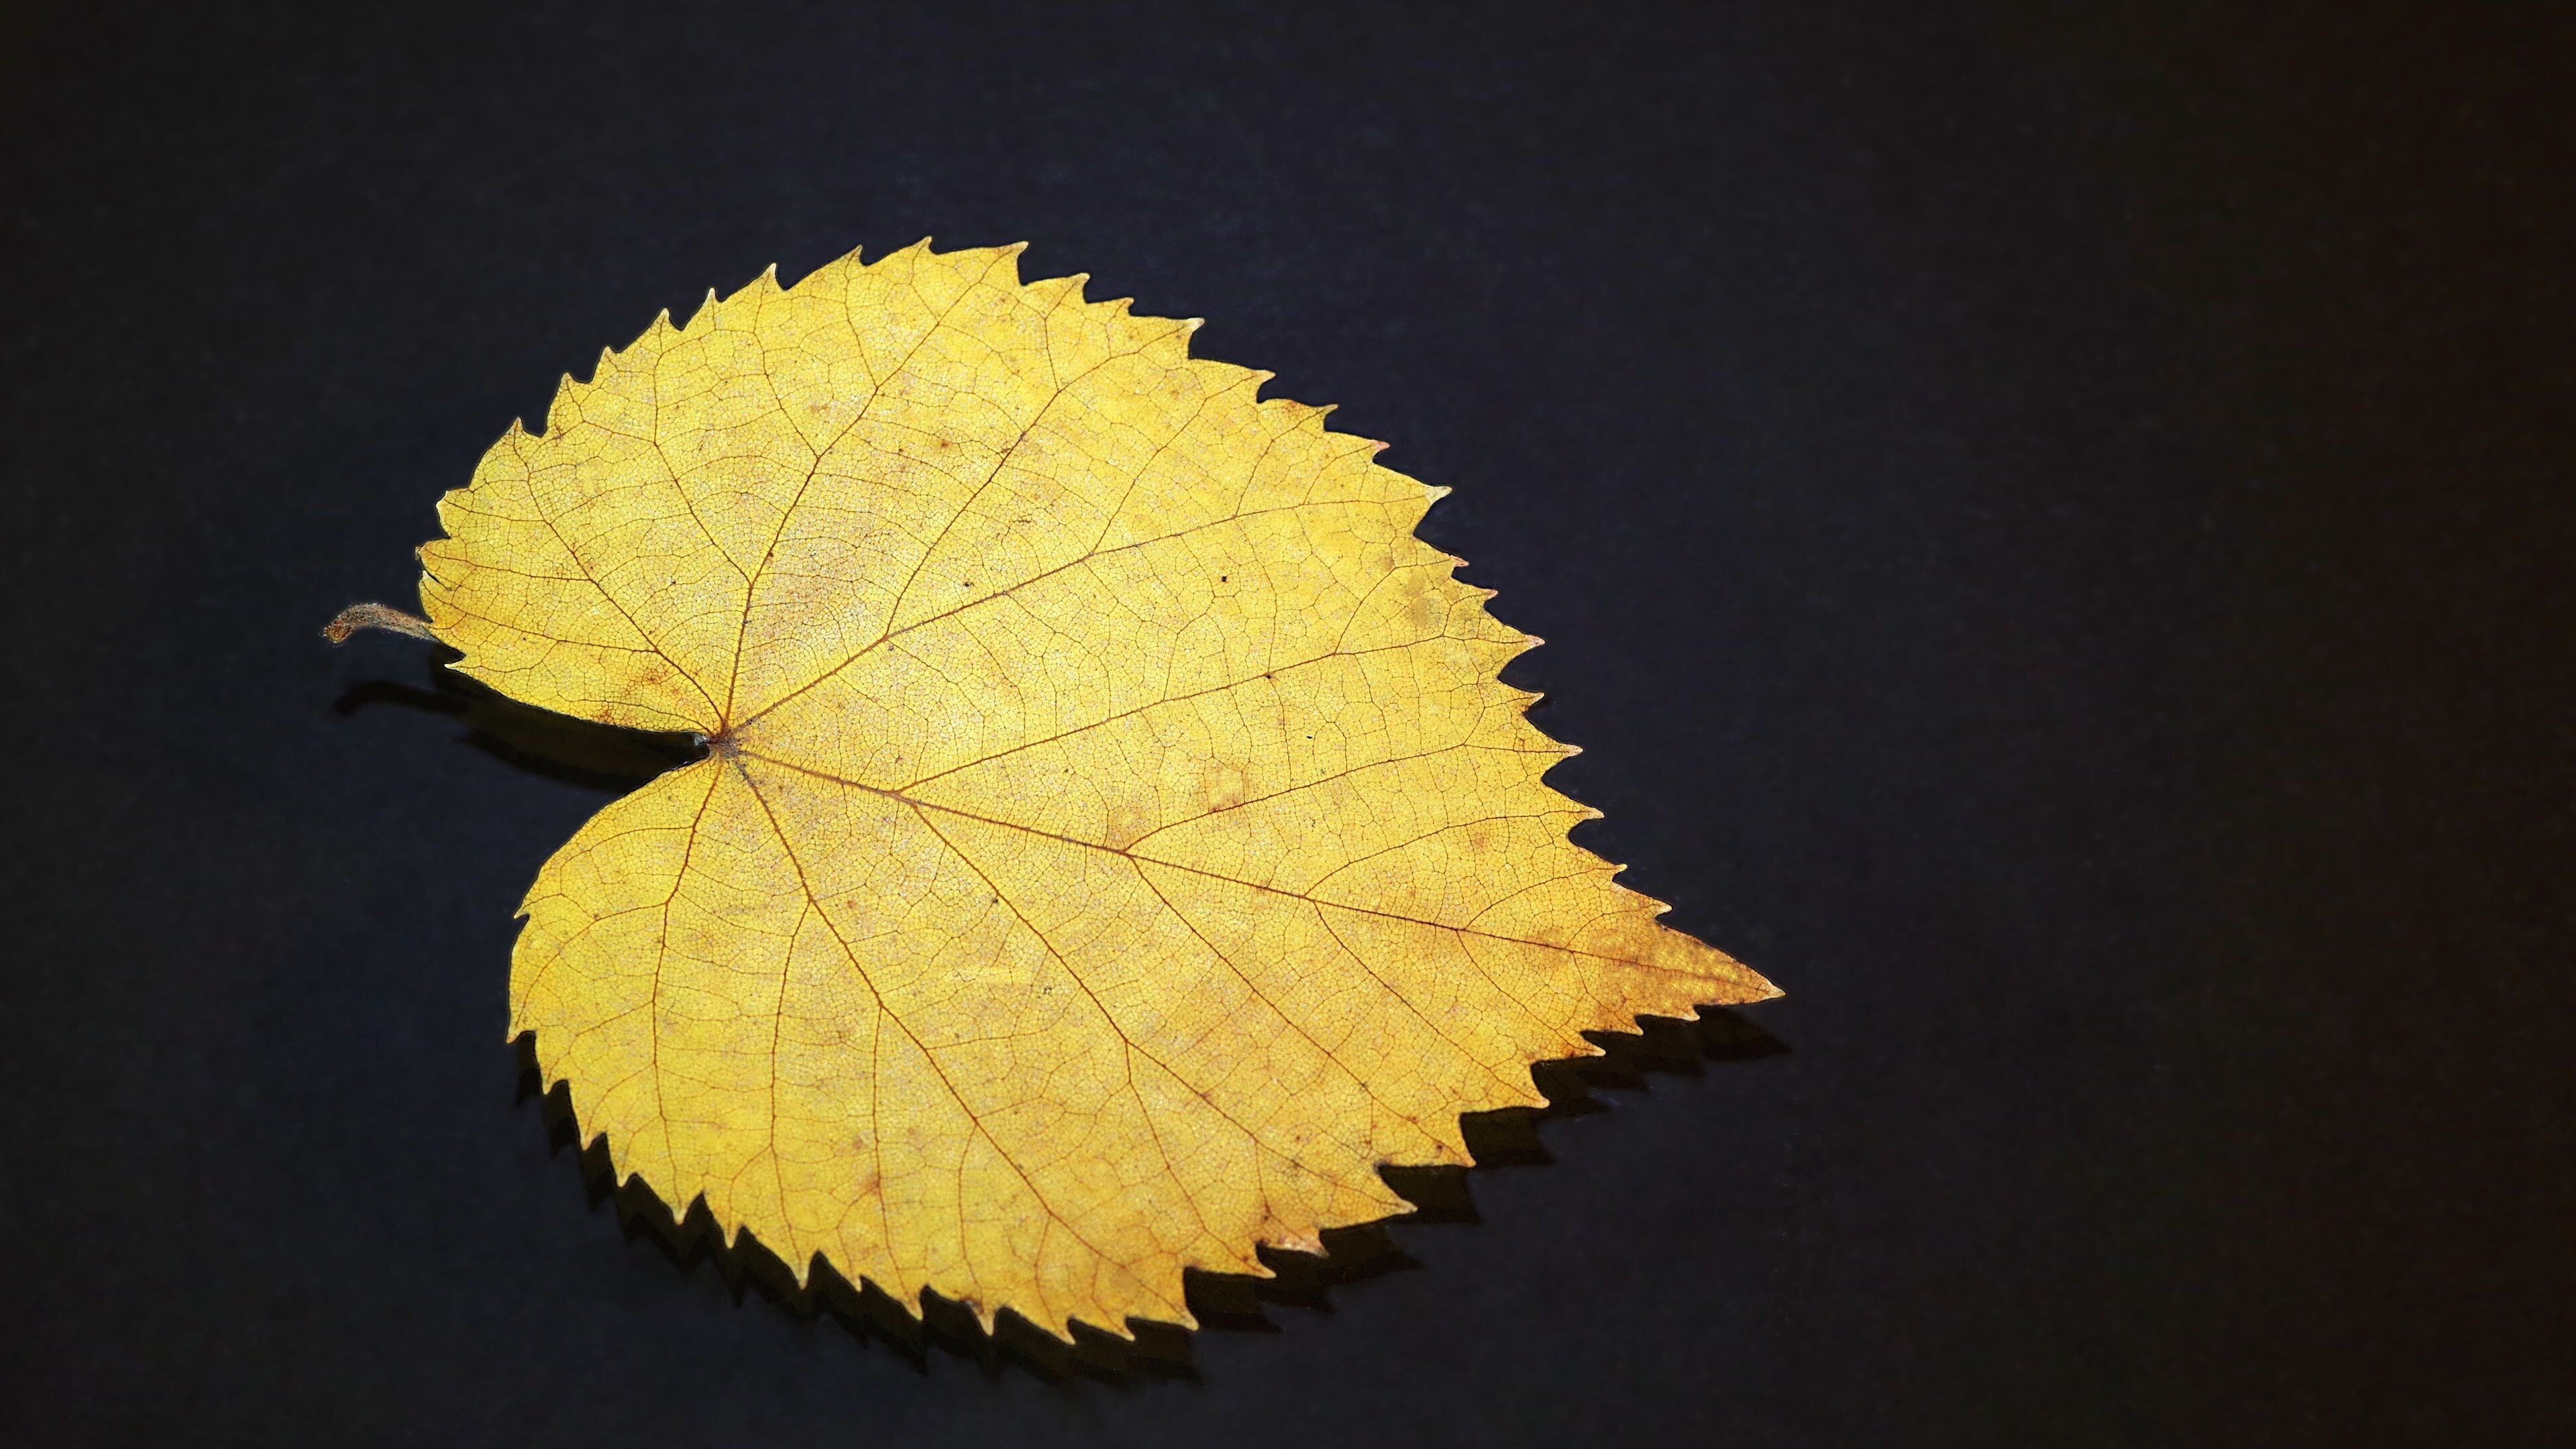 Gold Leaf: Chlorophyll breakdown in the autumn foliage, A catabolic process of leaves senescence. 3840x2160 4K Background.